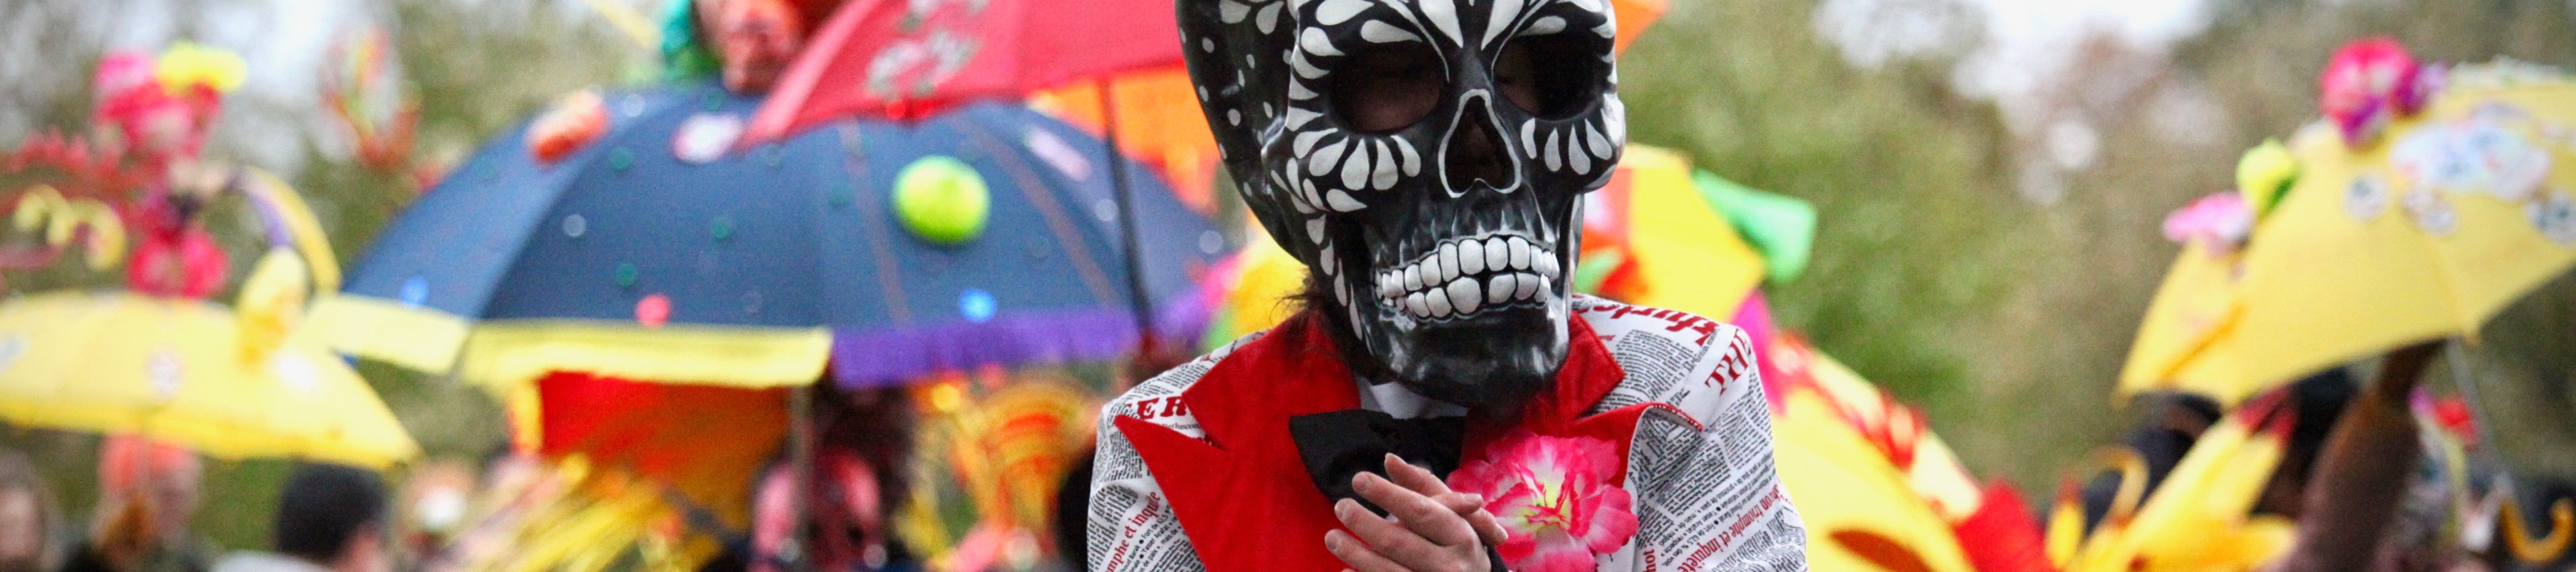 A man dressed up for Day of the Dead celebrations